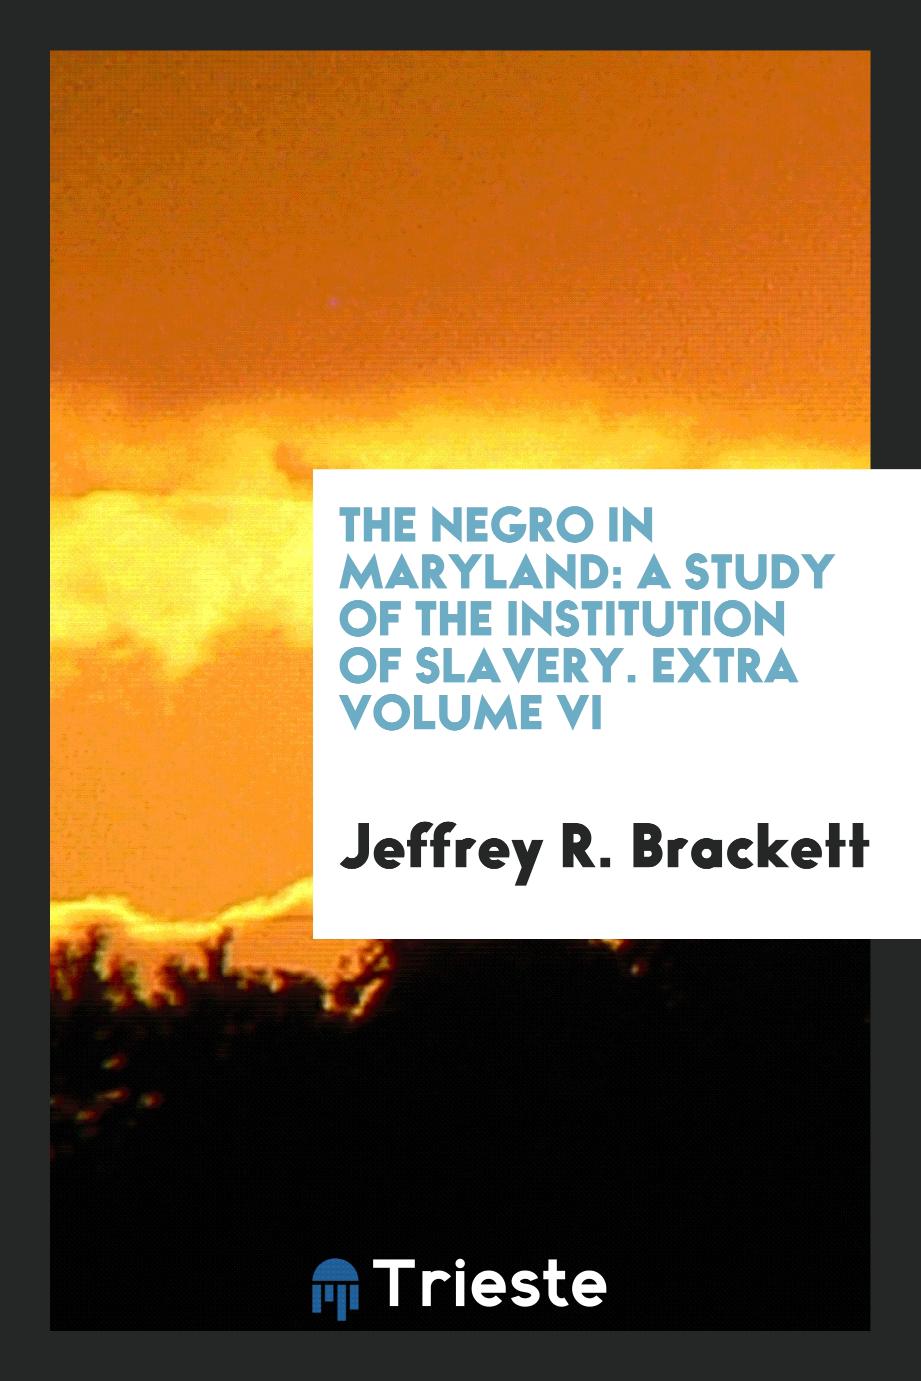 The Negro in Maryland: a study of the institution of slavery. Extra Volume VI